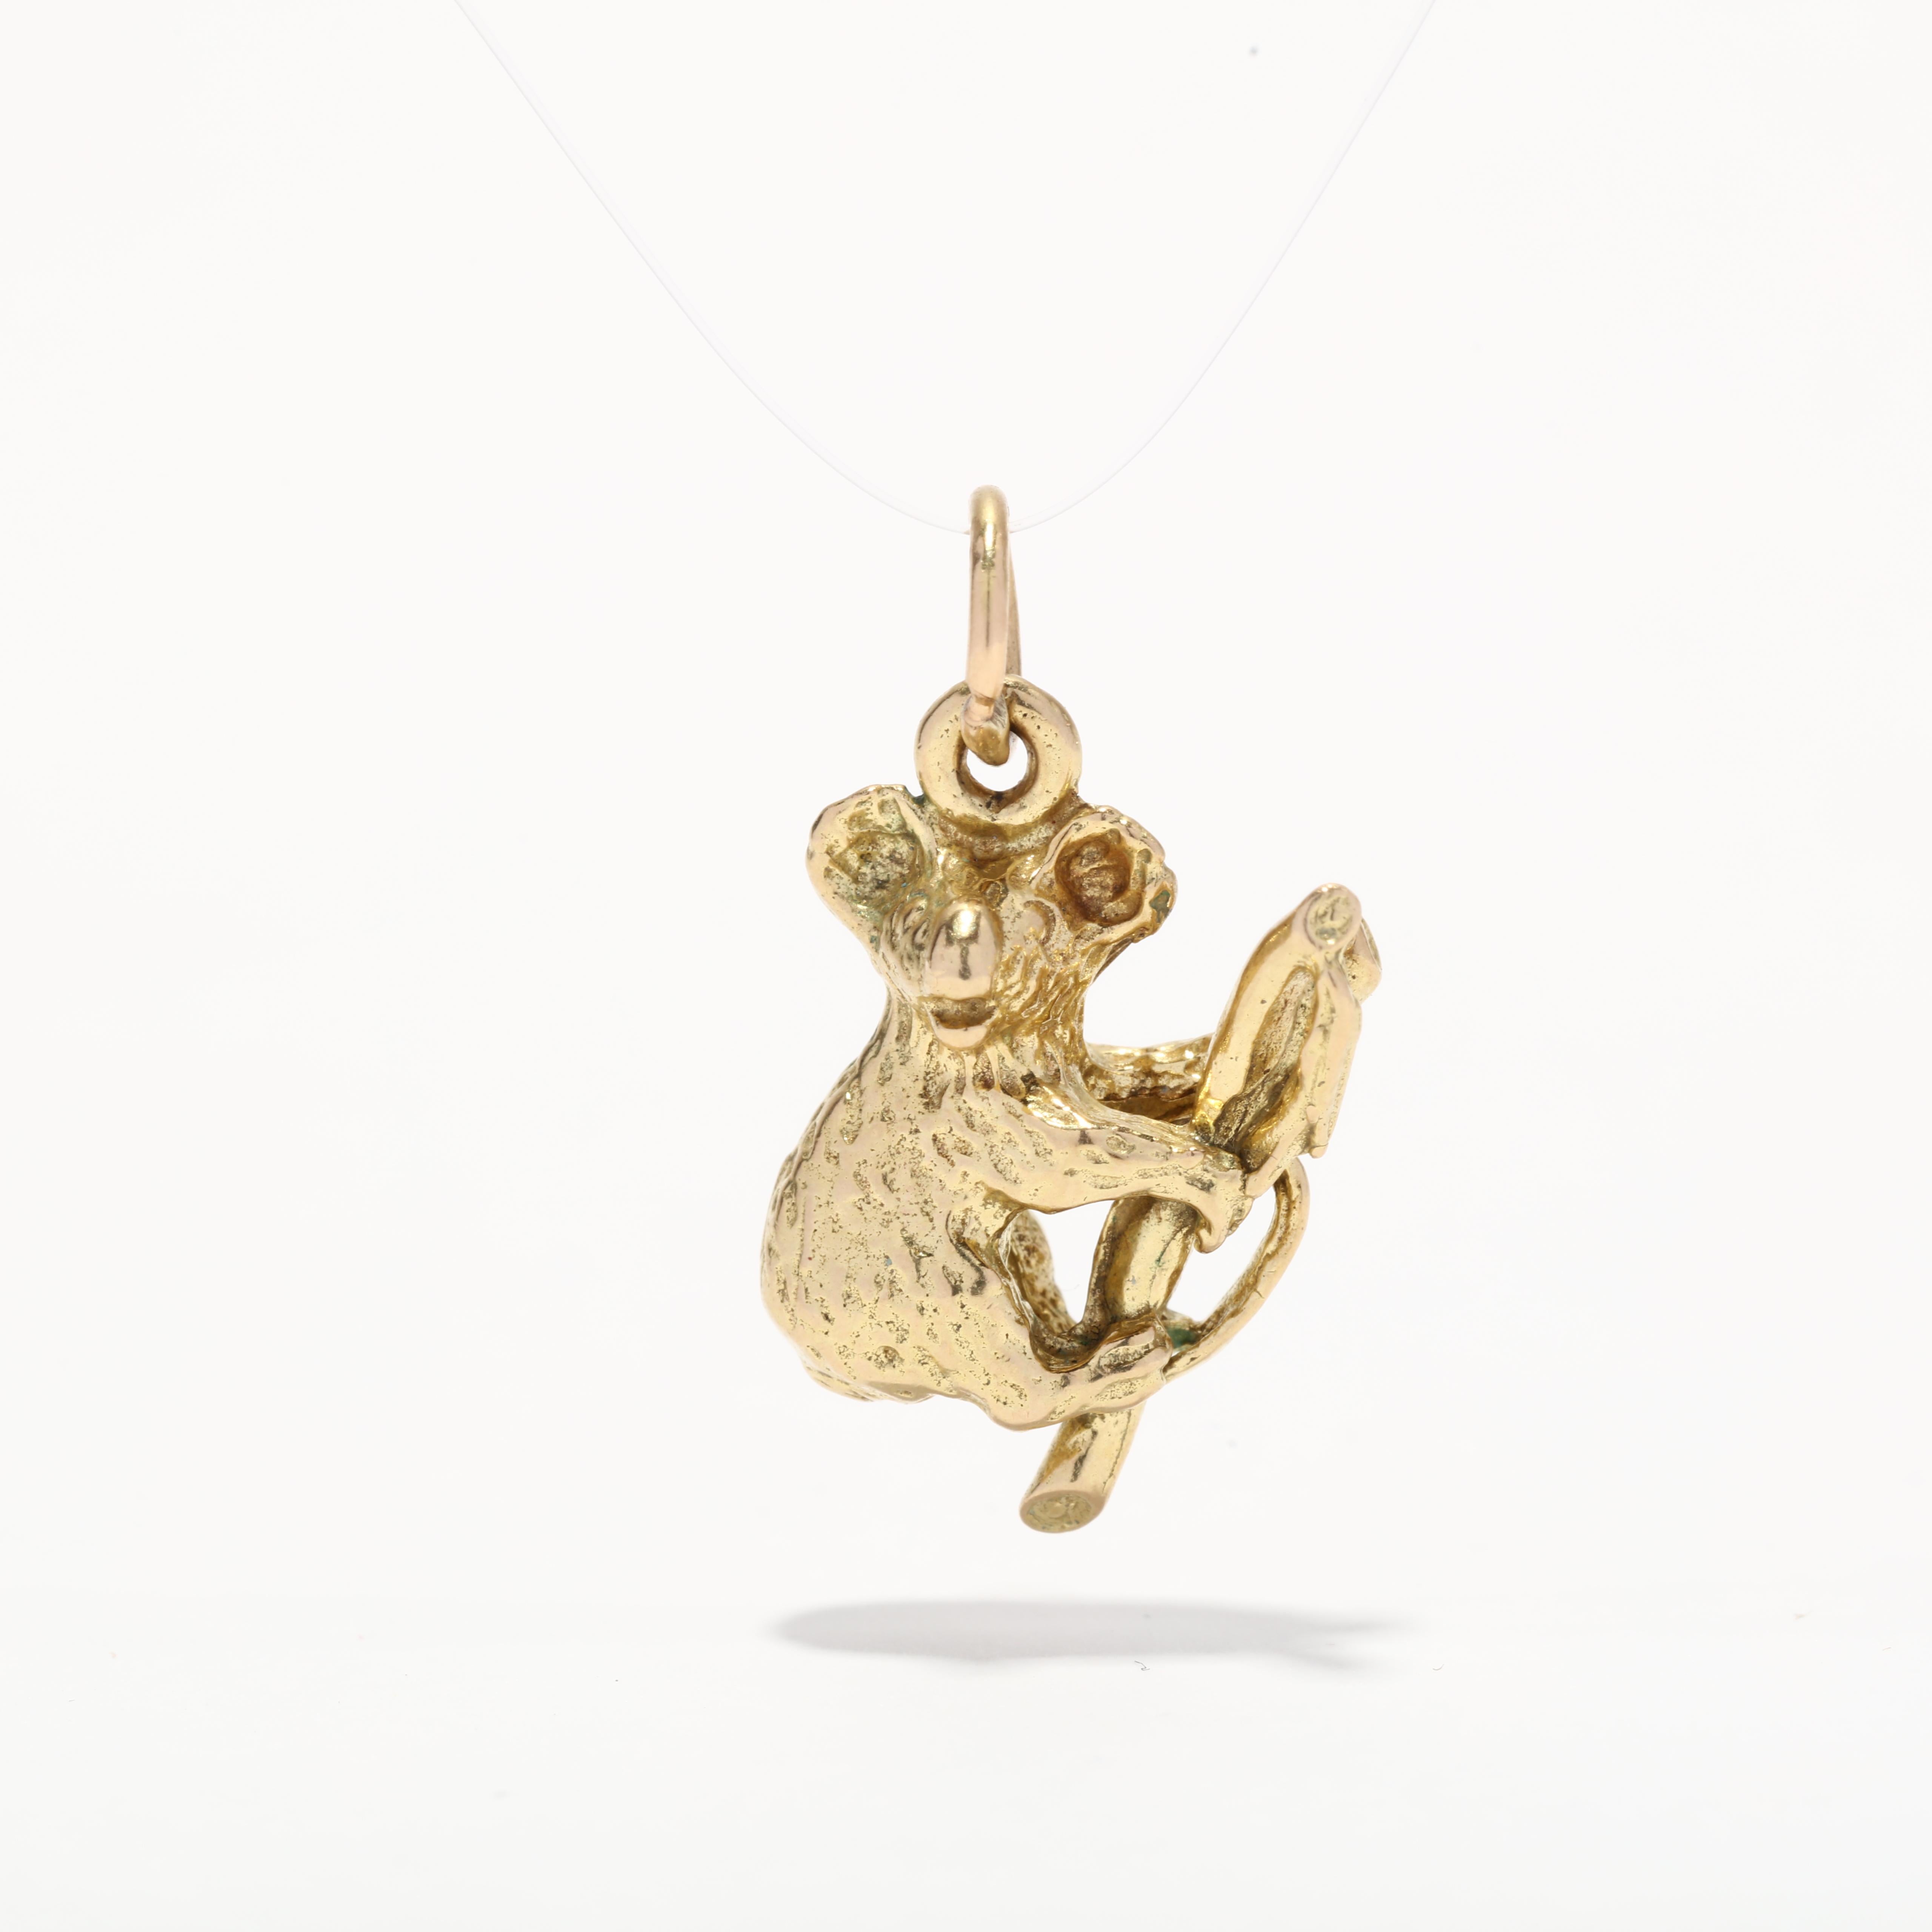 A vintage 18 karat yellow gold koala charm. This small charm features a koala bear climbing a branch with a textured finish and a thin bail.

Length: 7/8 in.

Width: 1/2 in.

Weight: 3.8 dwts.

Ring Sizings & Modifications:
*Please reach out before